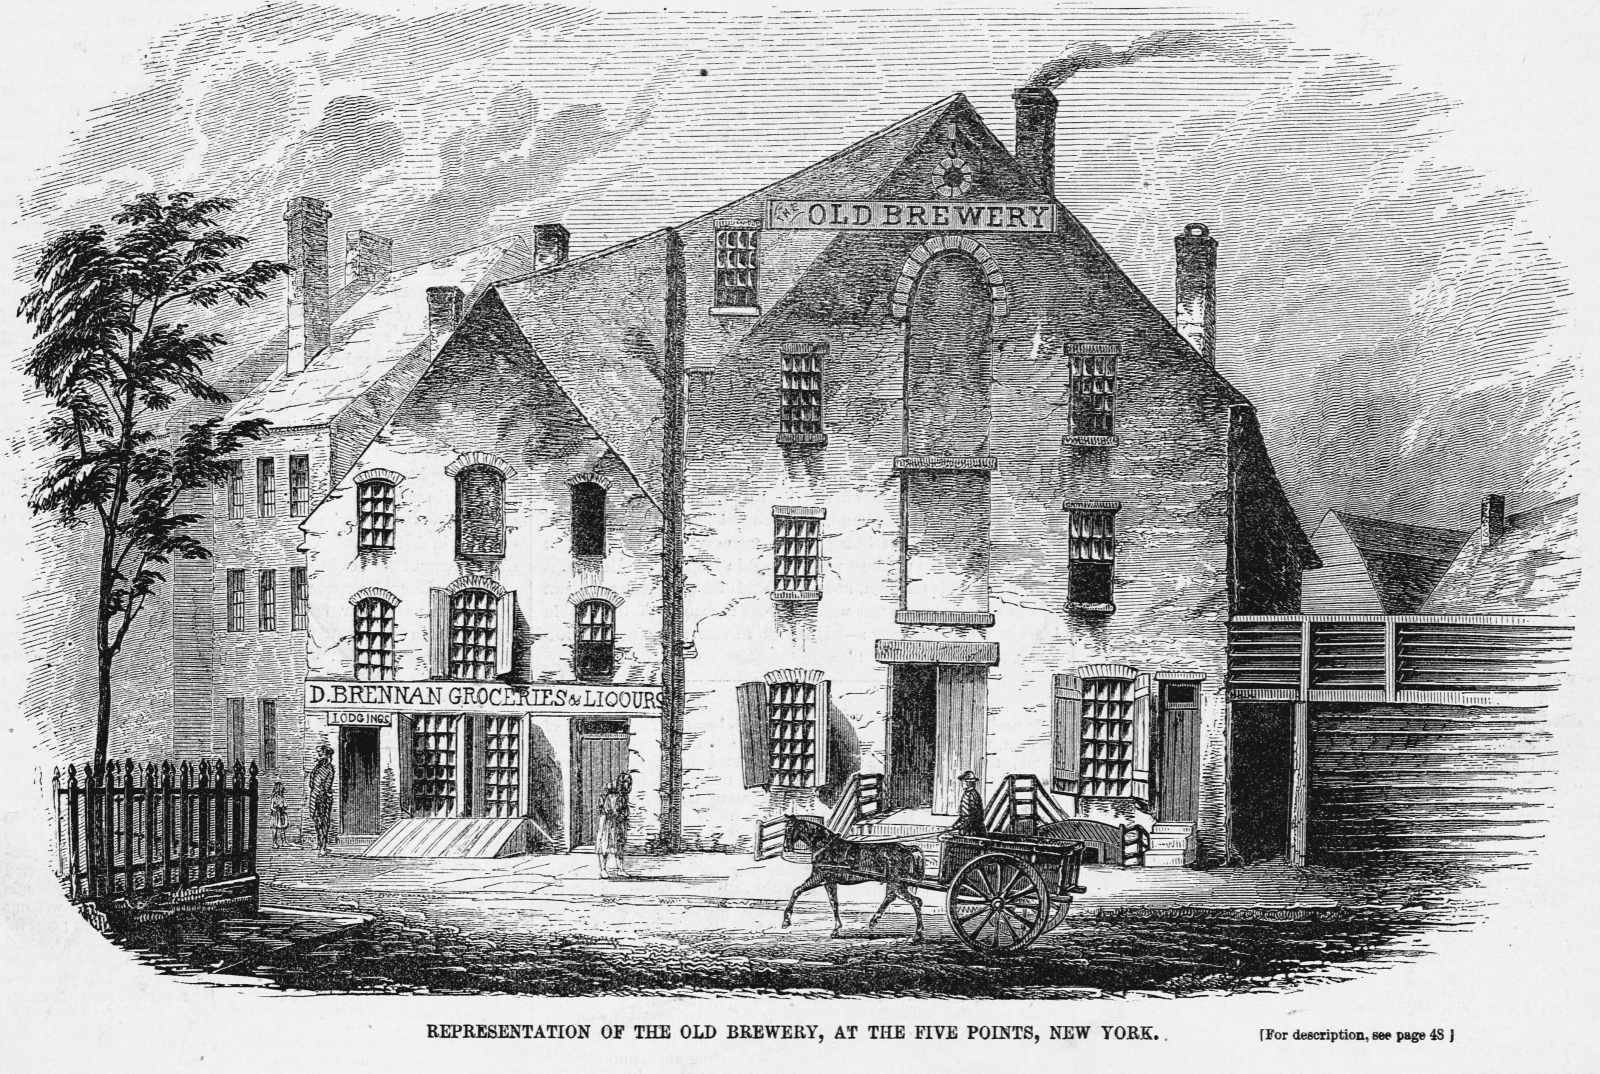 image of the old brewery in the five points nyc